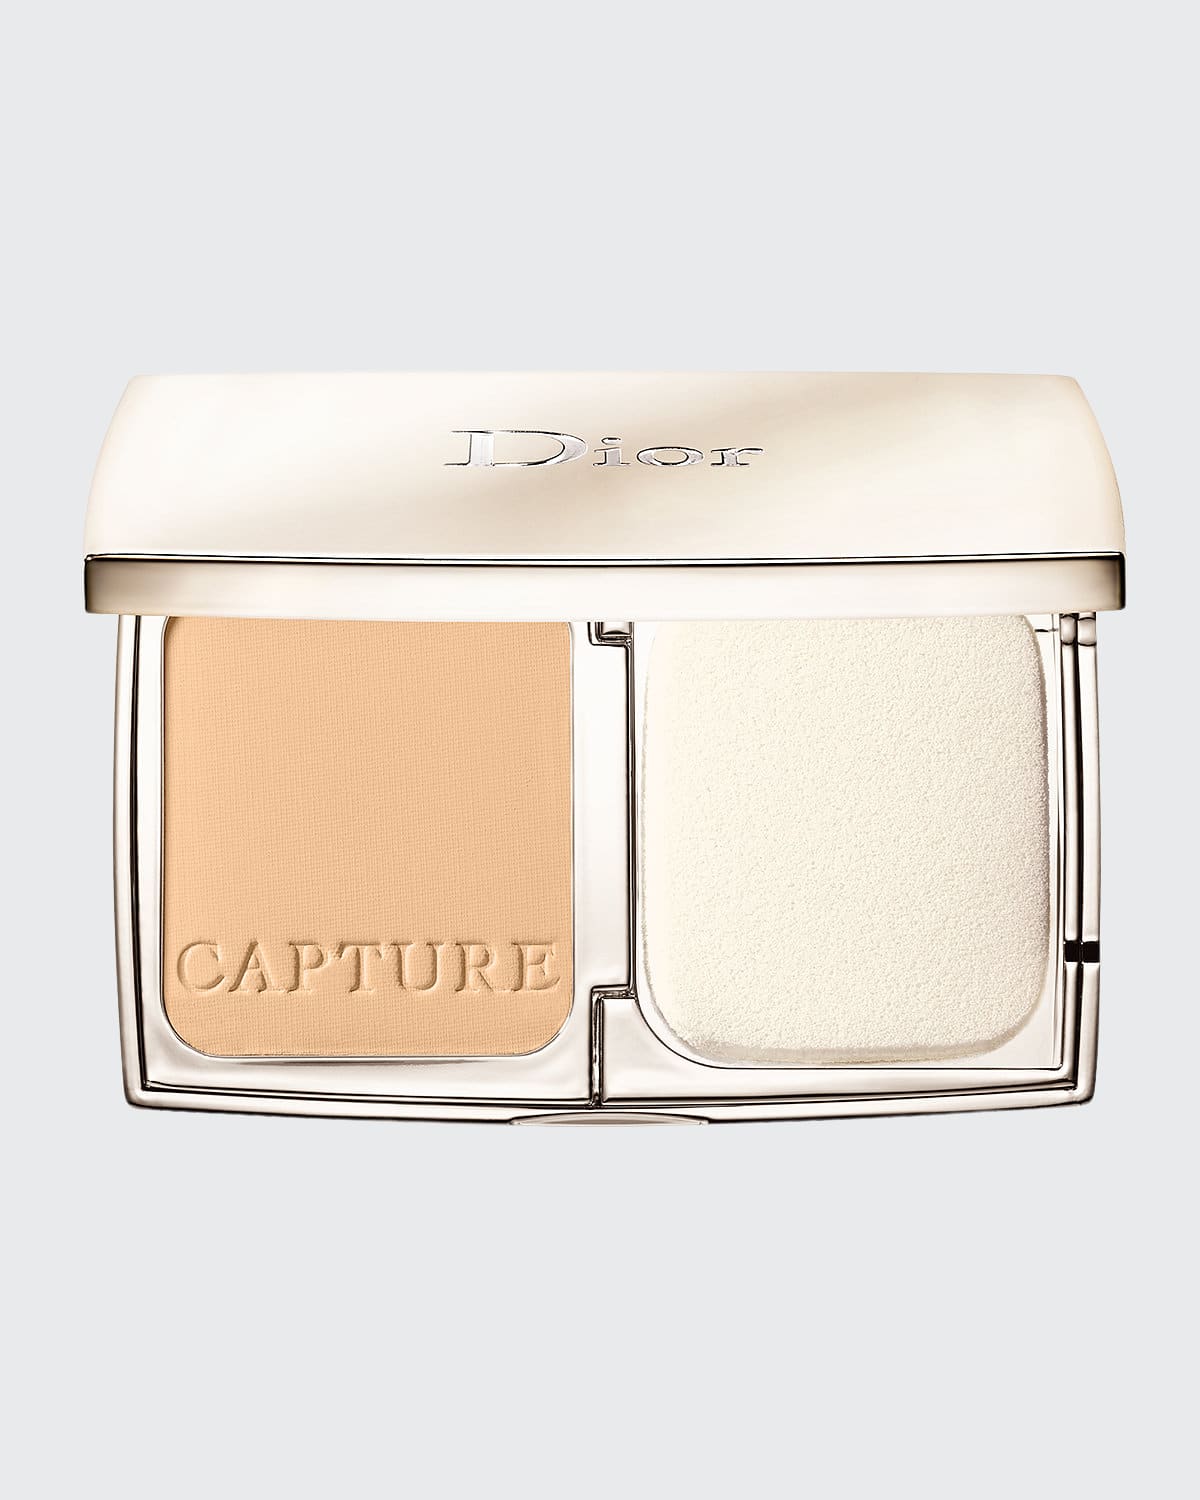 Dior Capture Totale Compact Foundation In 20 Light Beige